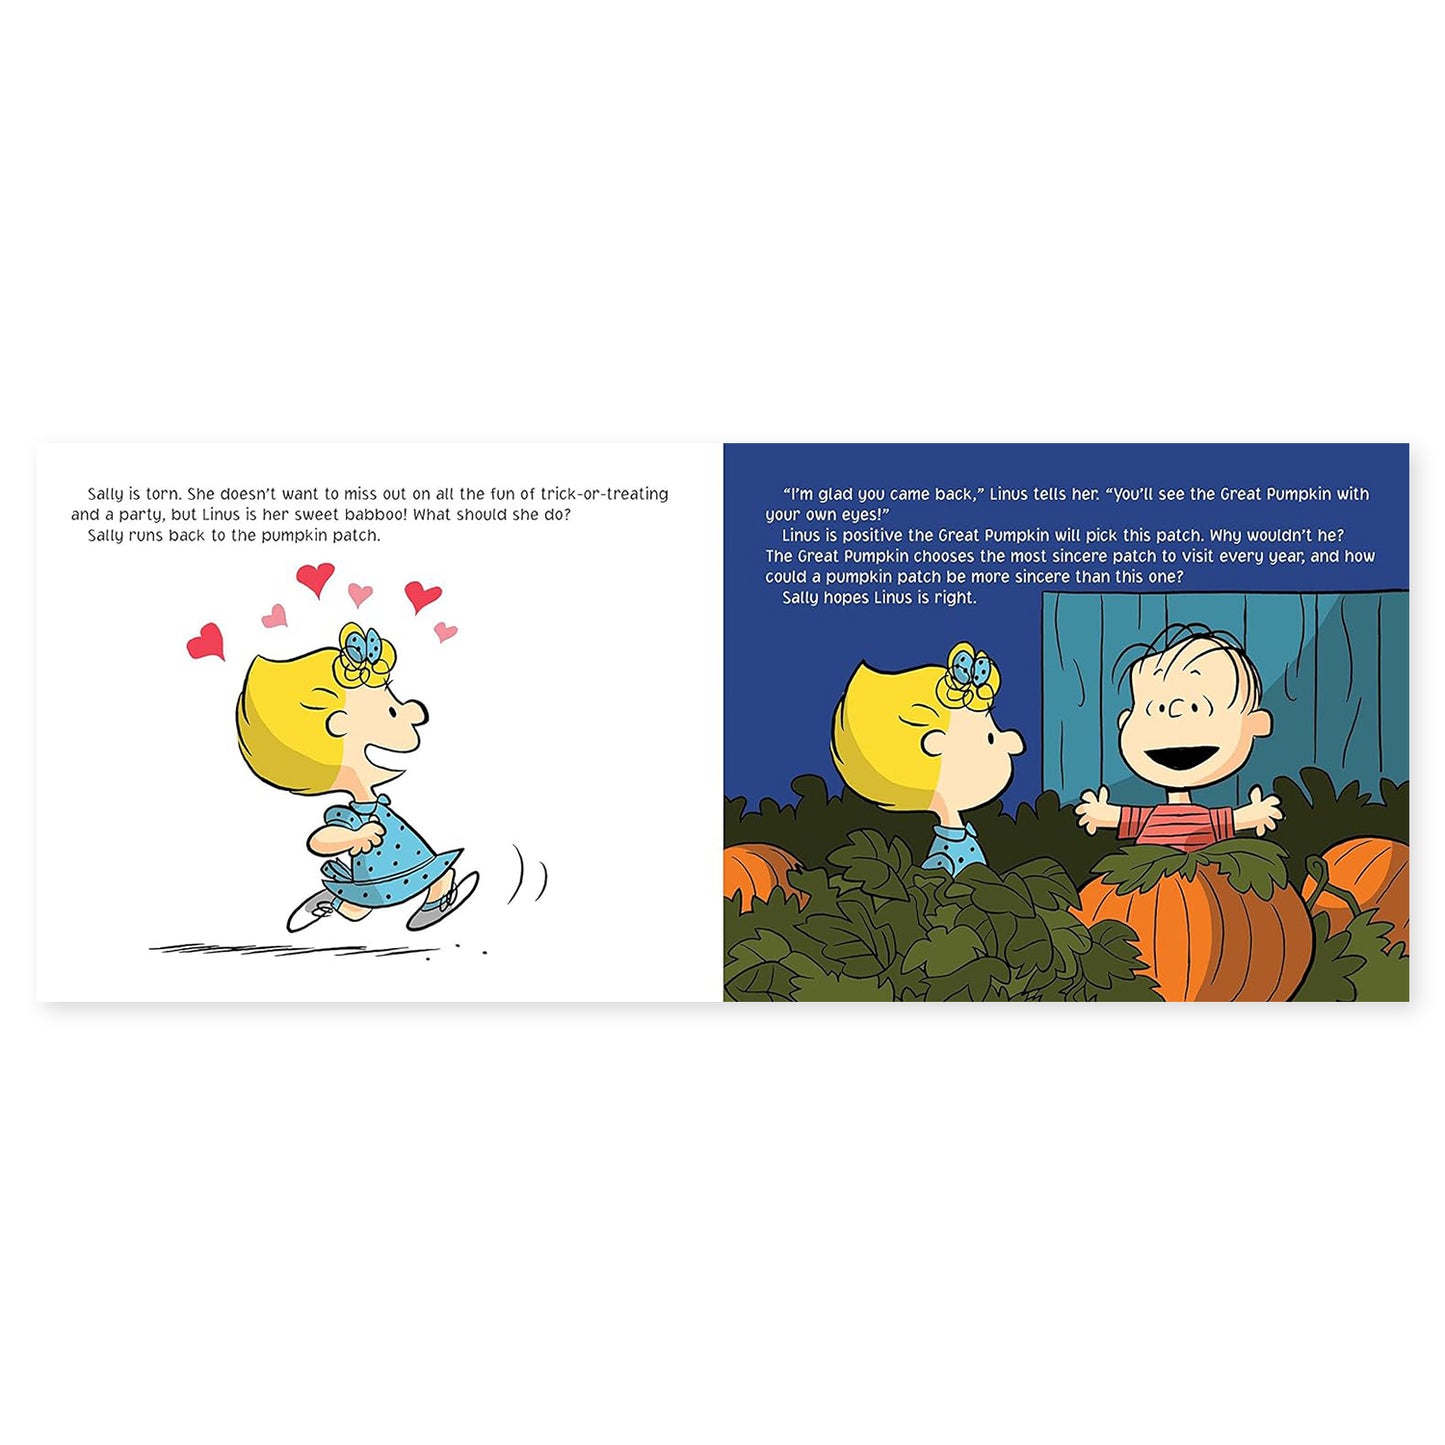 It's the Great Pumpkin, Charlie Brown Board Book